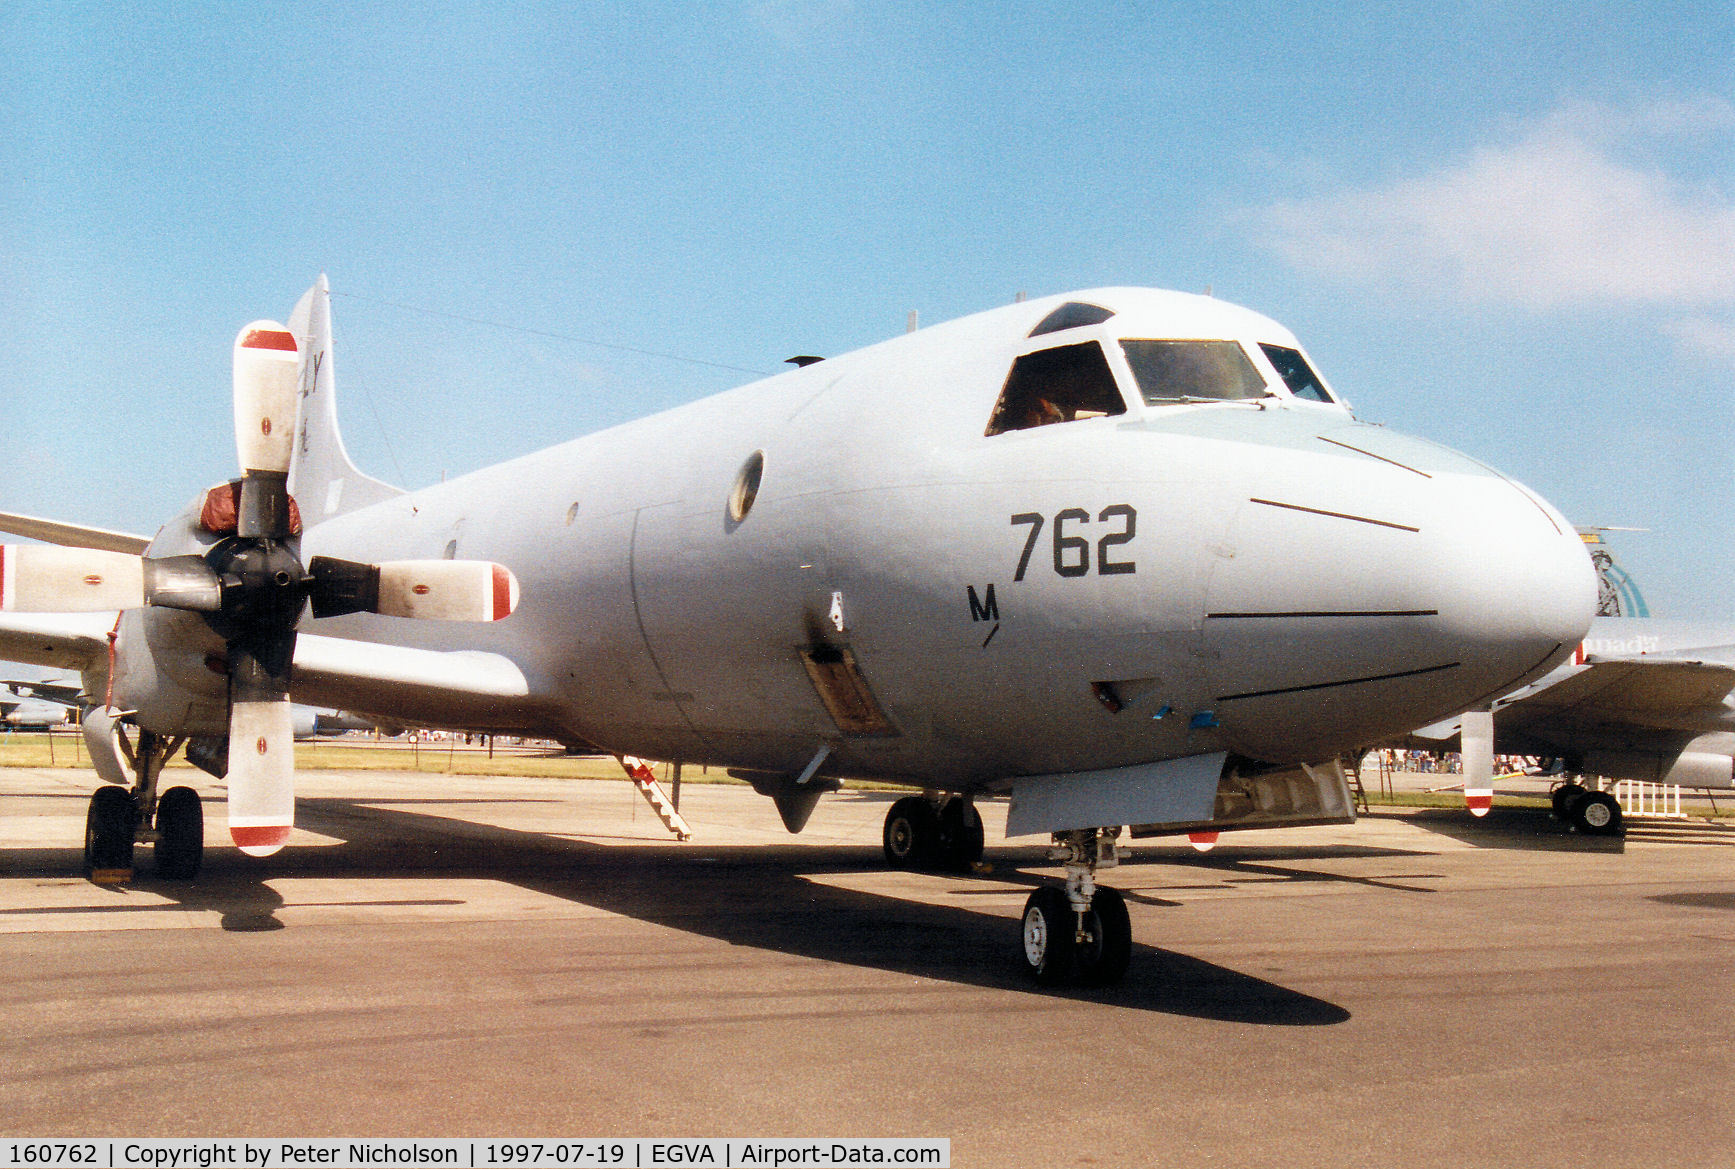 160762, Lockheed P-3C Orion C/N 285A-5671, Another view of the Patrol Squadron VP-92 P-3C Orion on display at the 1997 Intnl Air Tattoo at RAF Fairford.